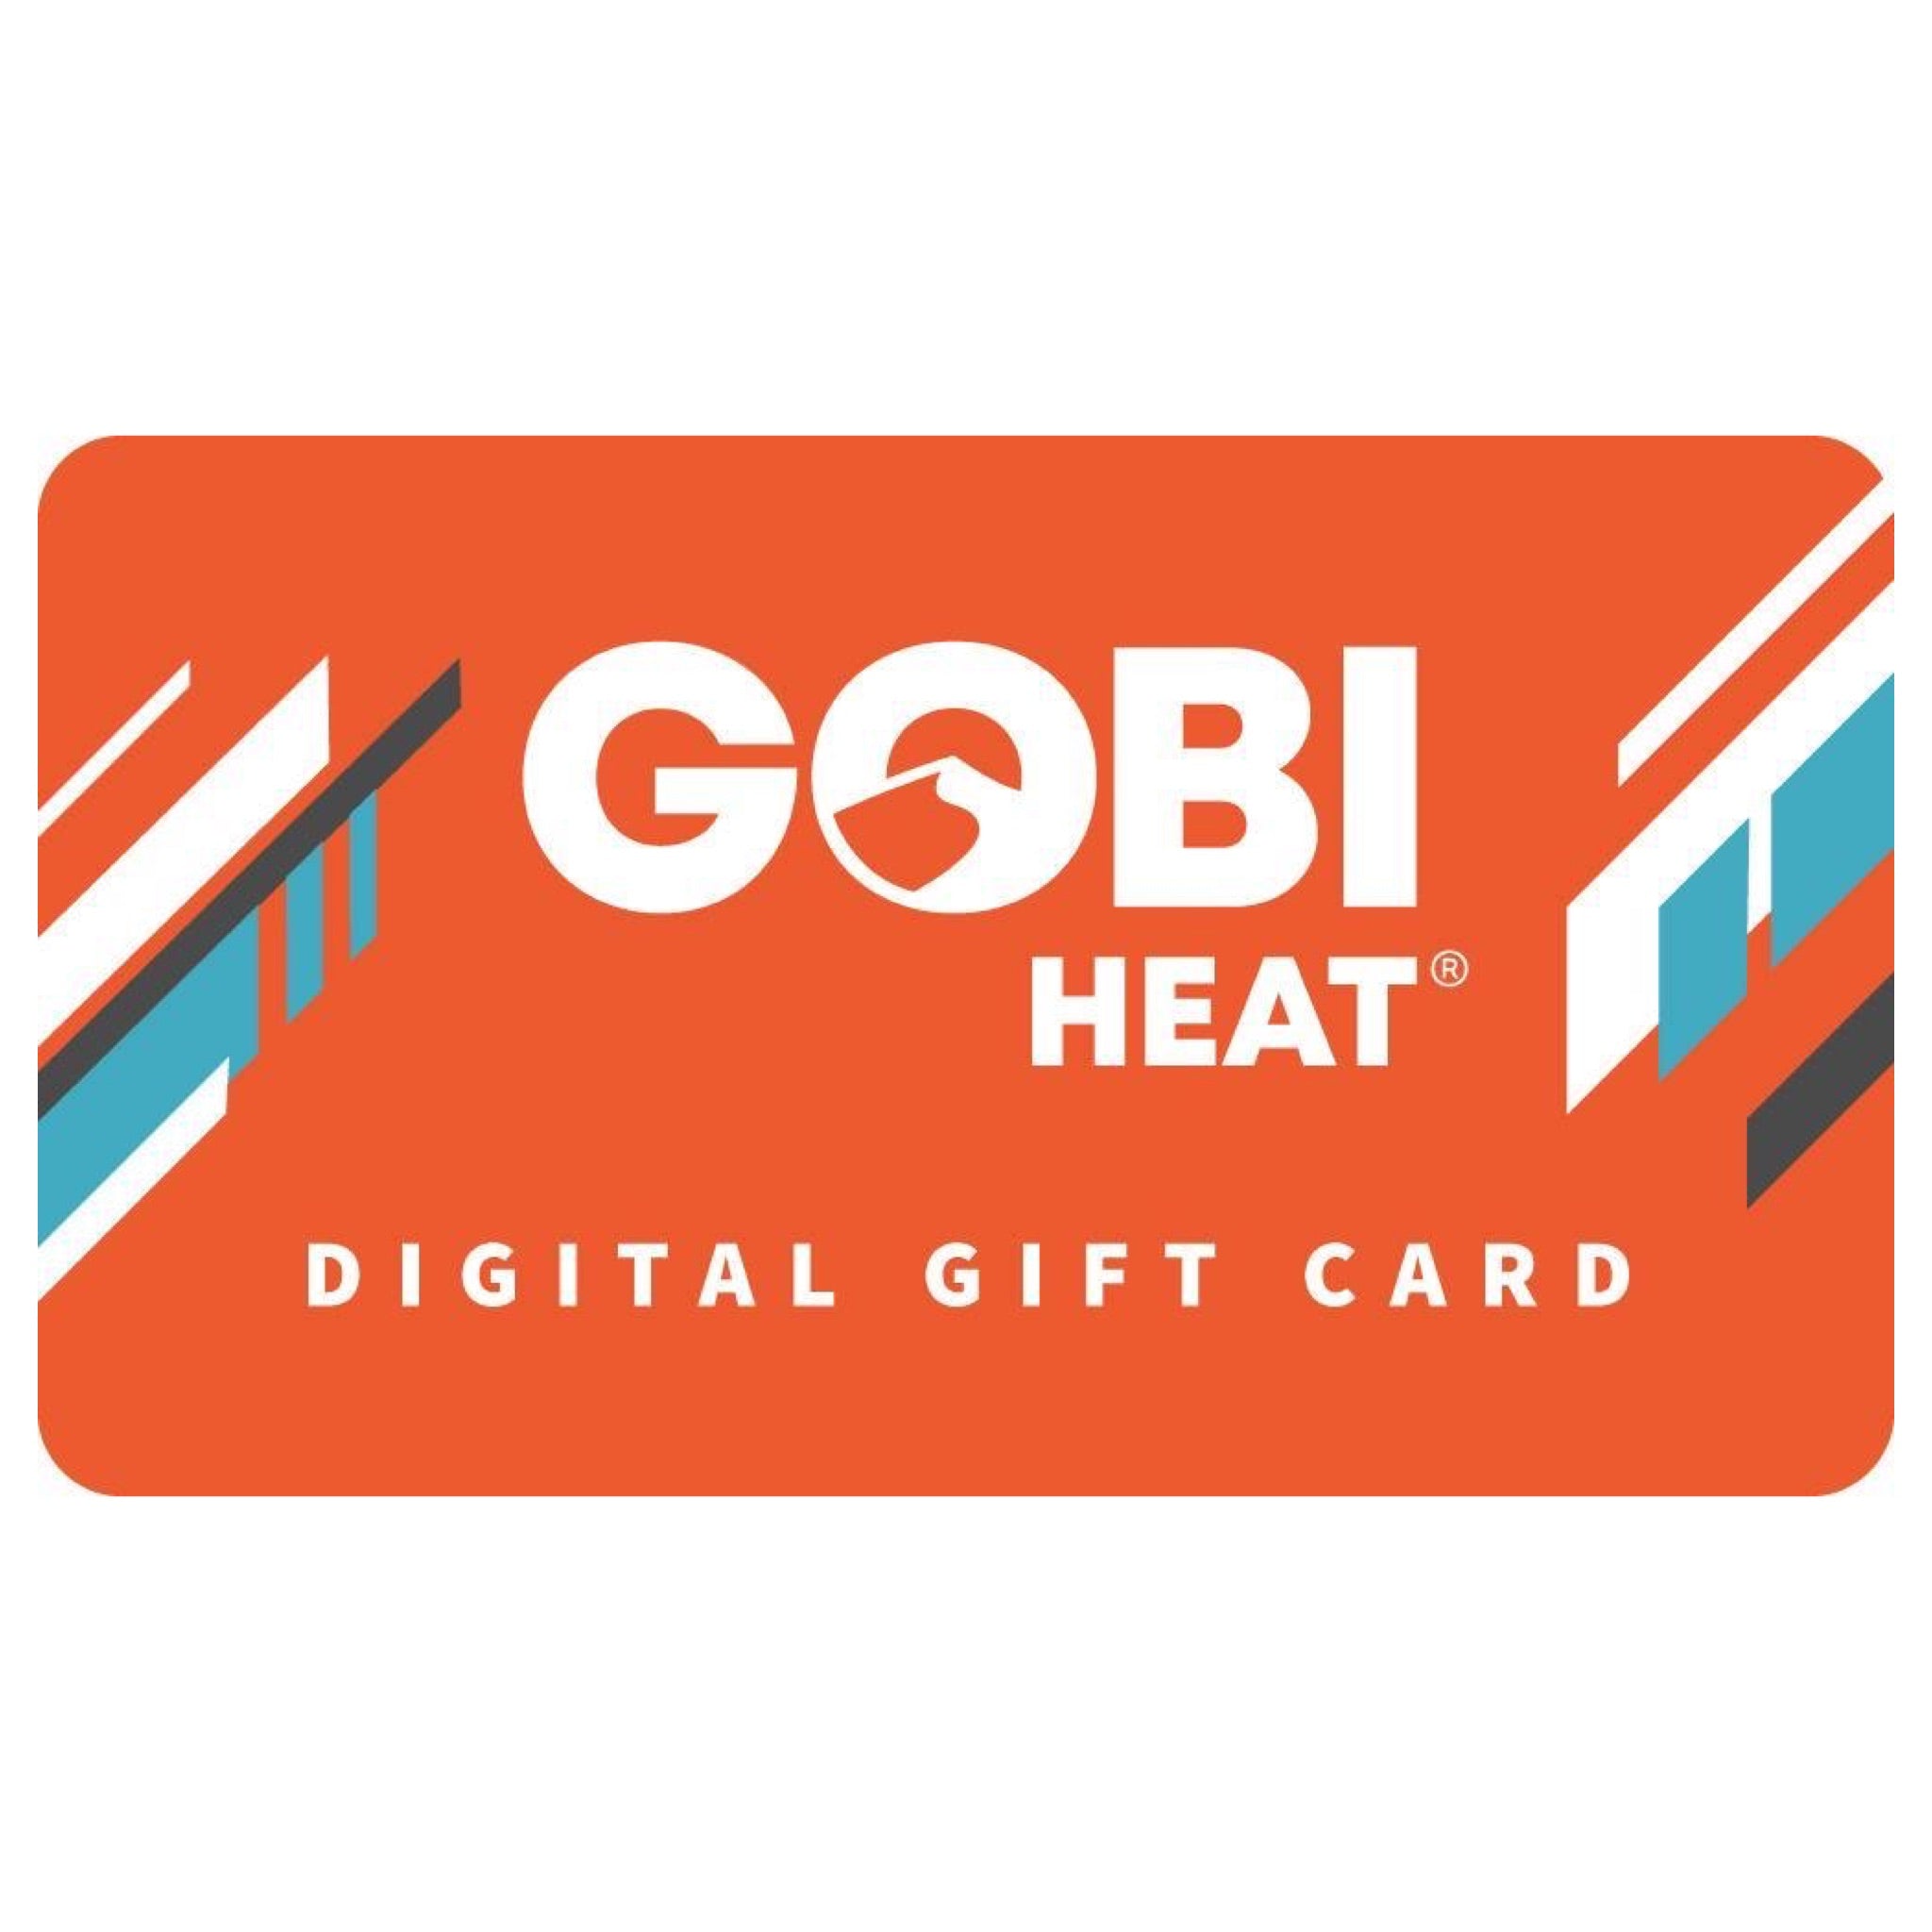 Gobi Heat Digital Gift card. Orange with white and blue accent images